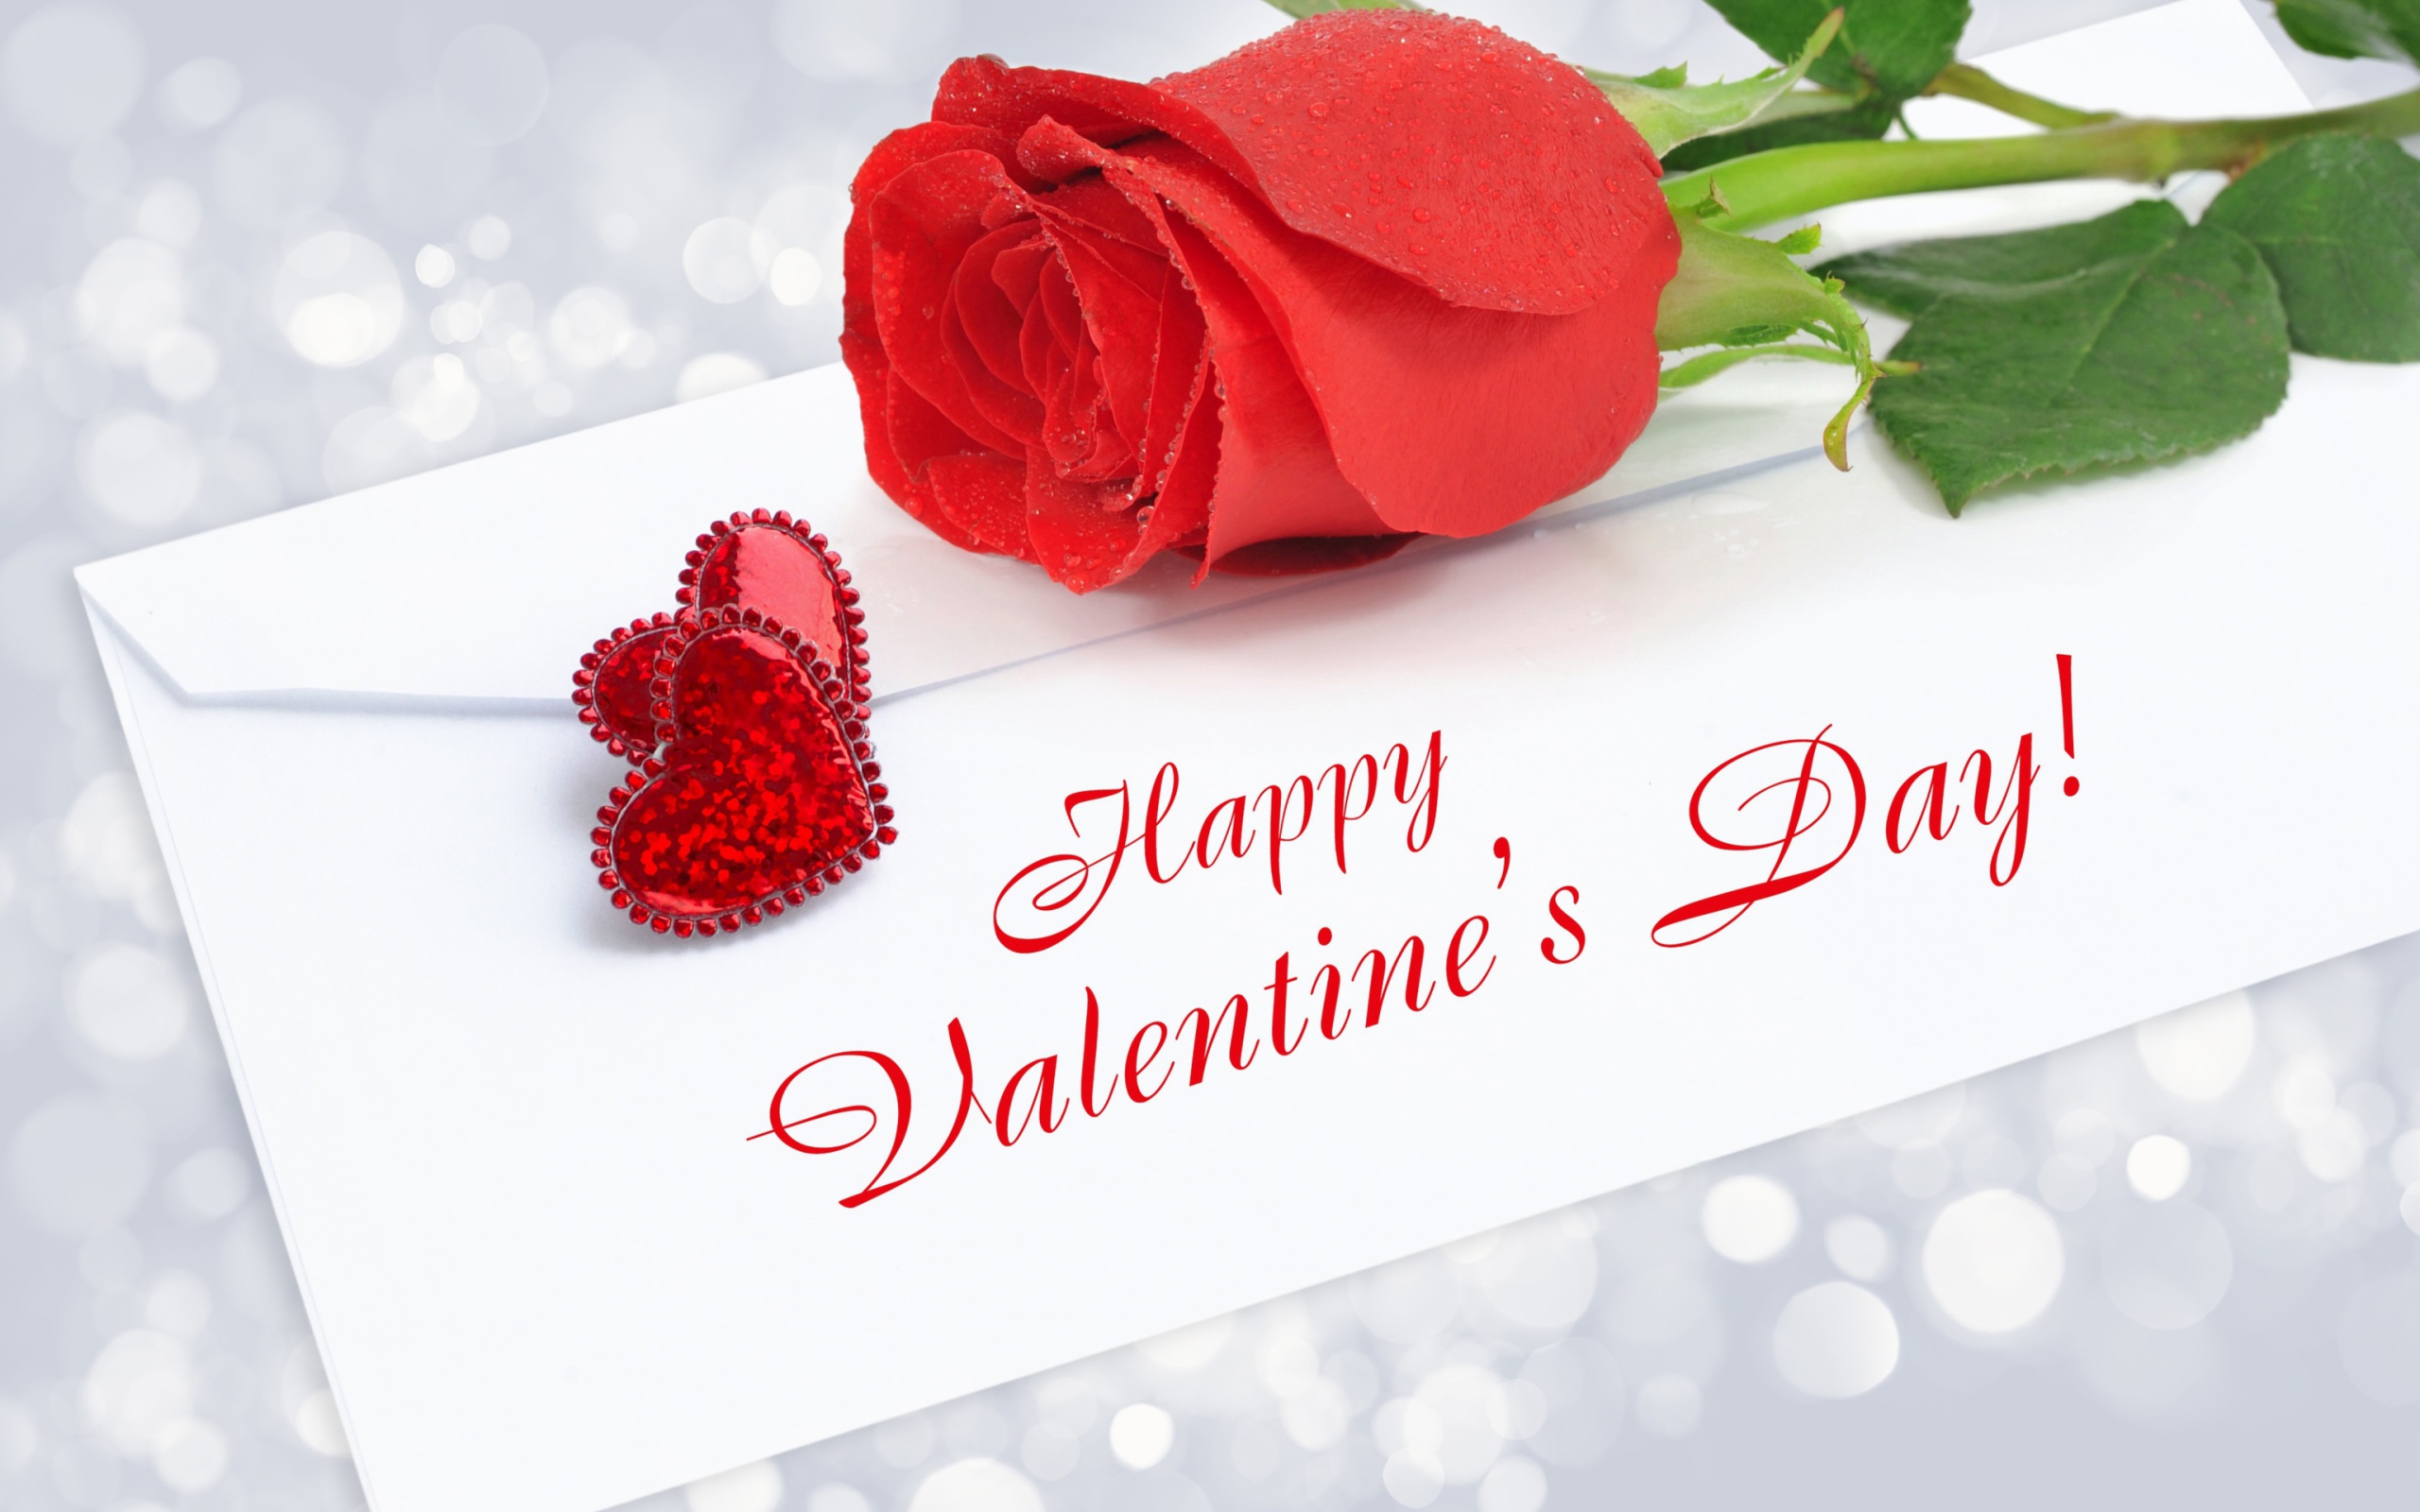 Valentines Day Greetings Card wallpaper 2560x1600